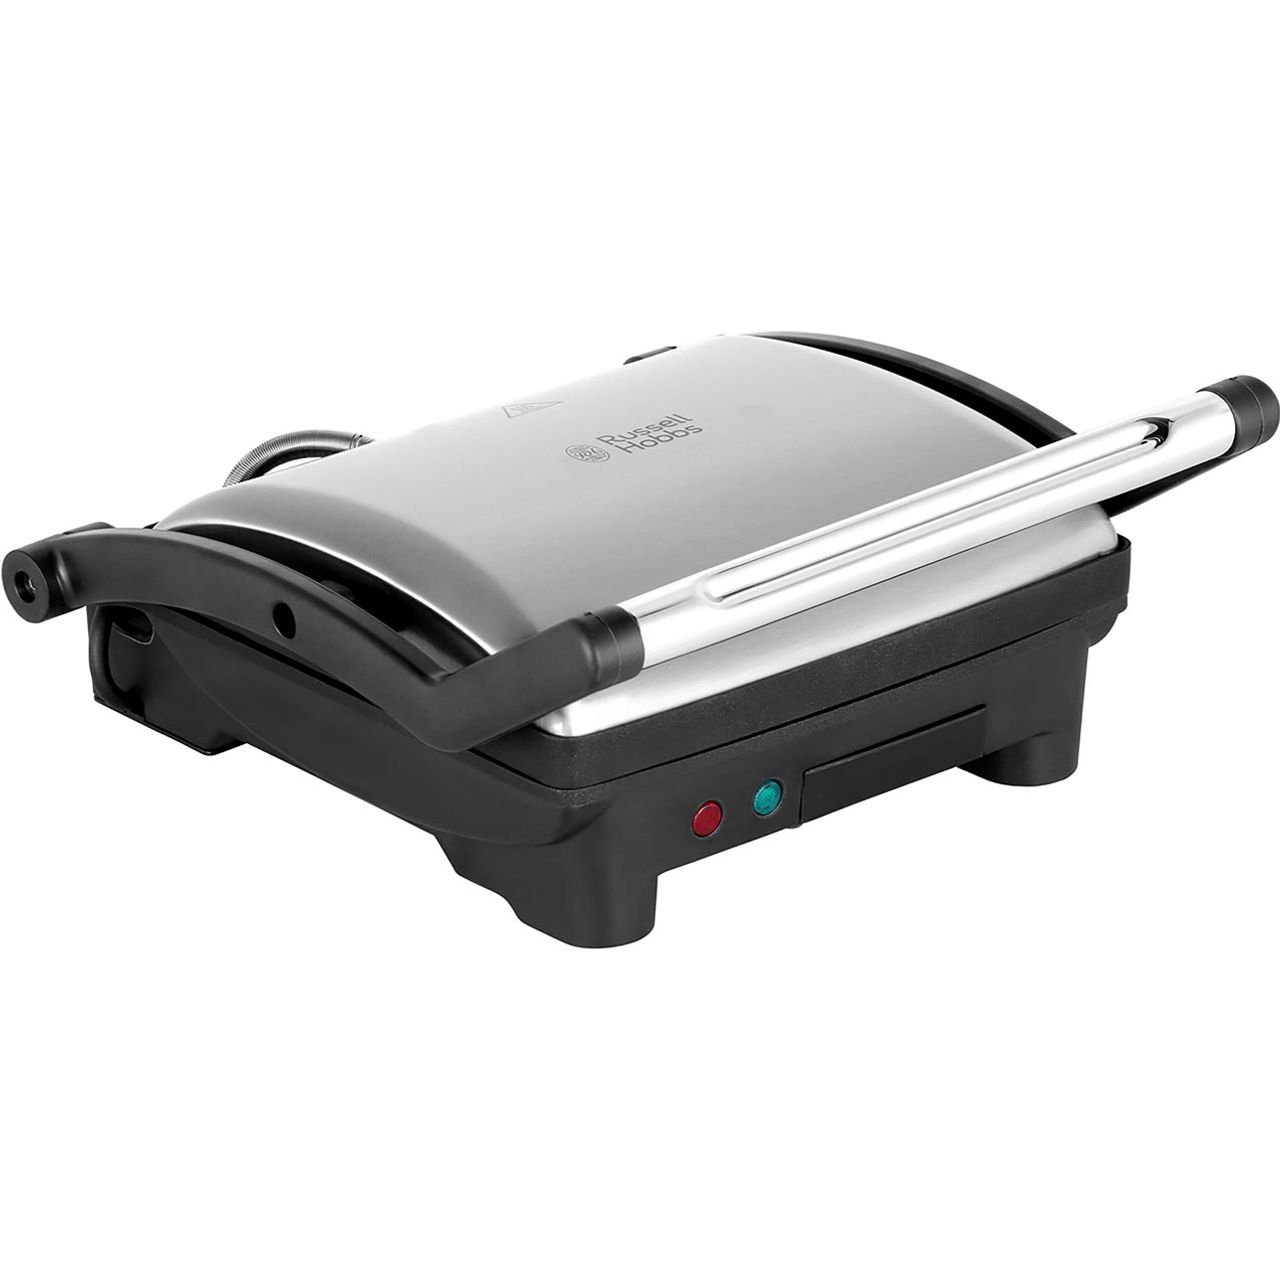 Russell Hobbs Panini Grill And Griddle 17888 Sandwich Toaster Review